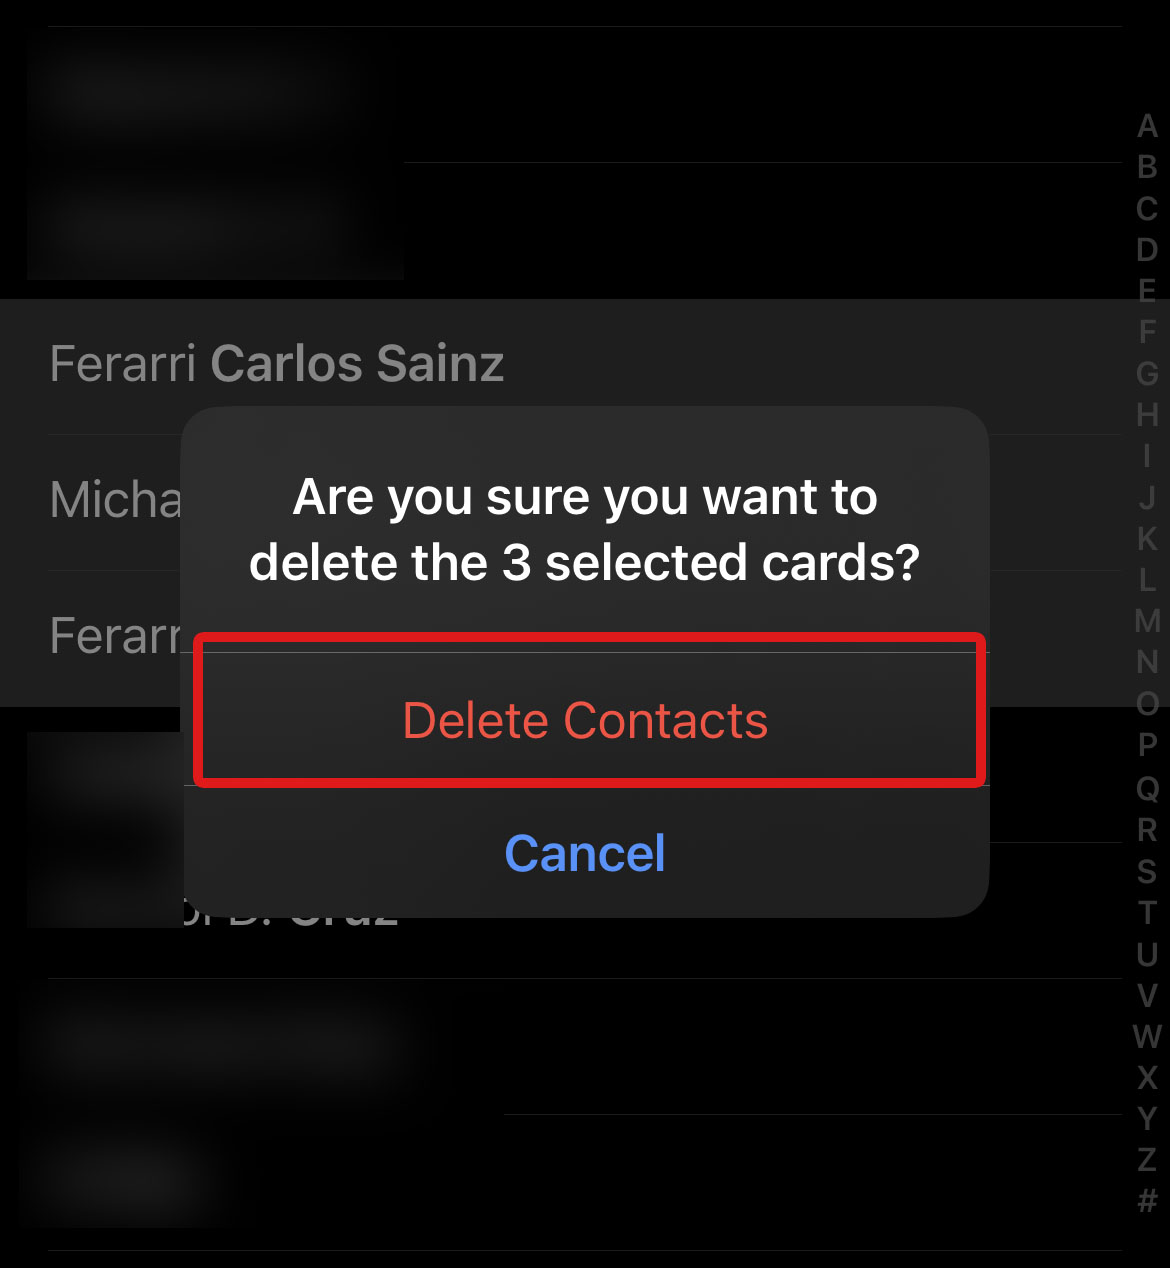 delete contacts confirmation